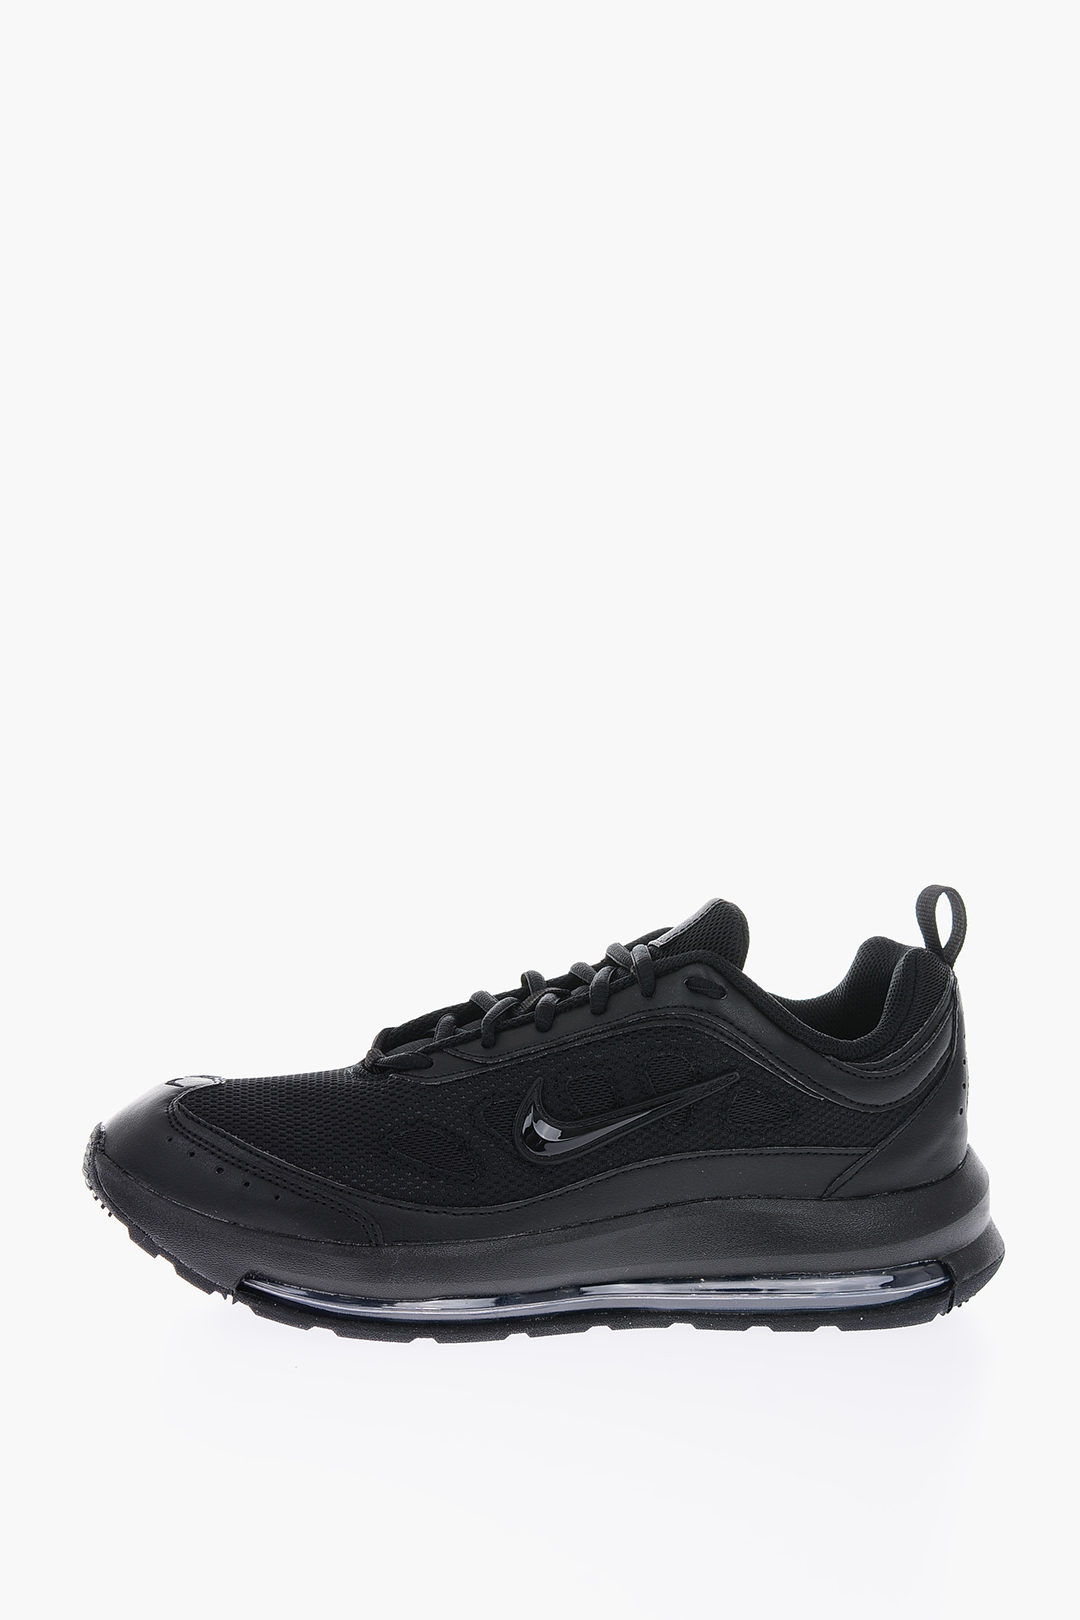 De kerk kort geest Nike Solid Color AIR MAX AP Sneakers with Air Bubble Sole men - Glamood  Outlet